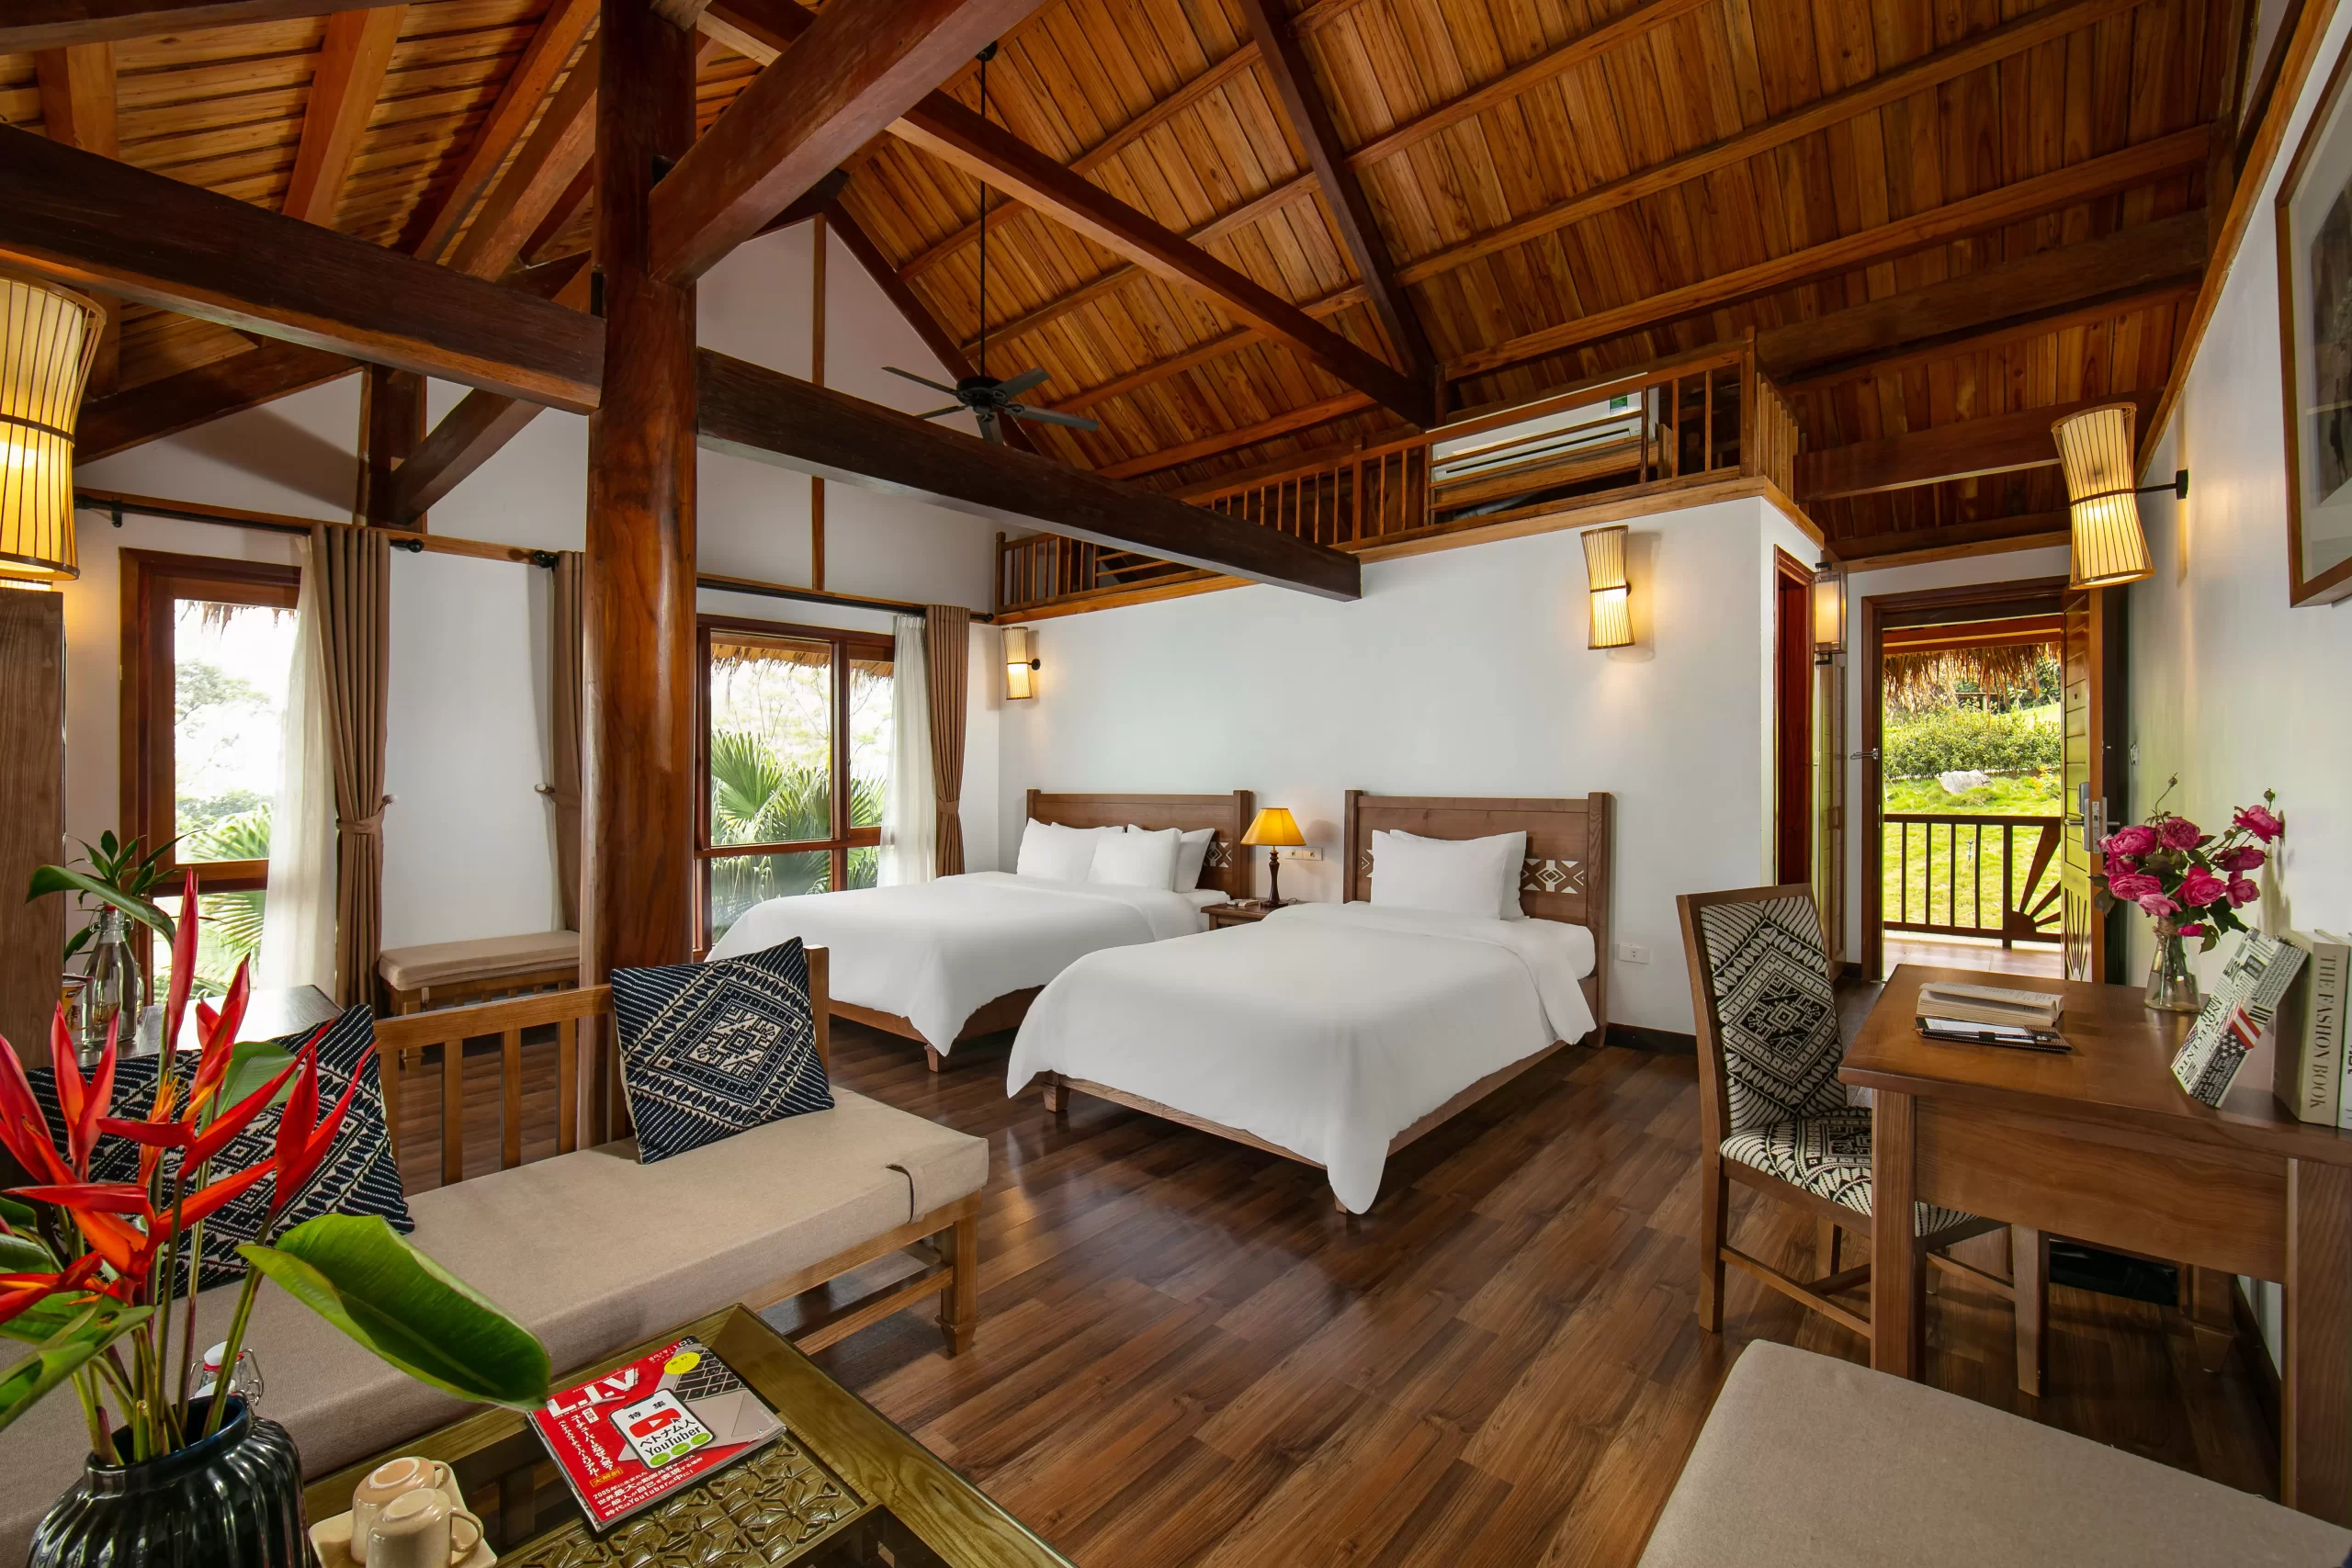 Bliss Hoi An was recommended by Traveltimes Korea as a favorite destination